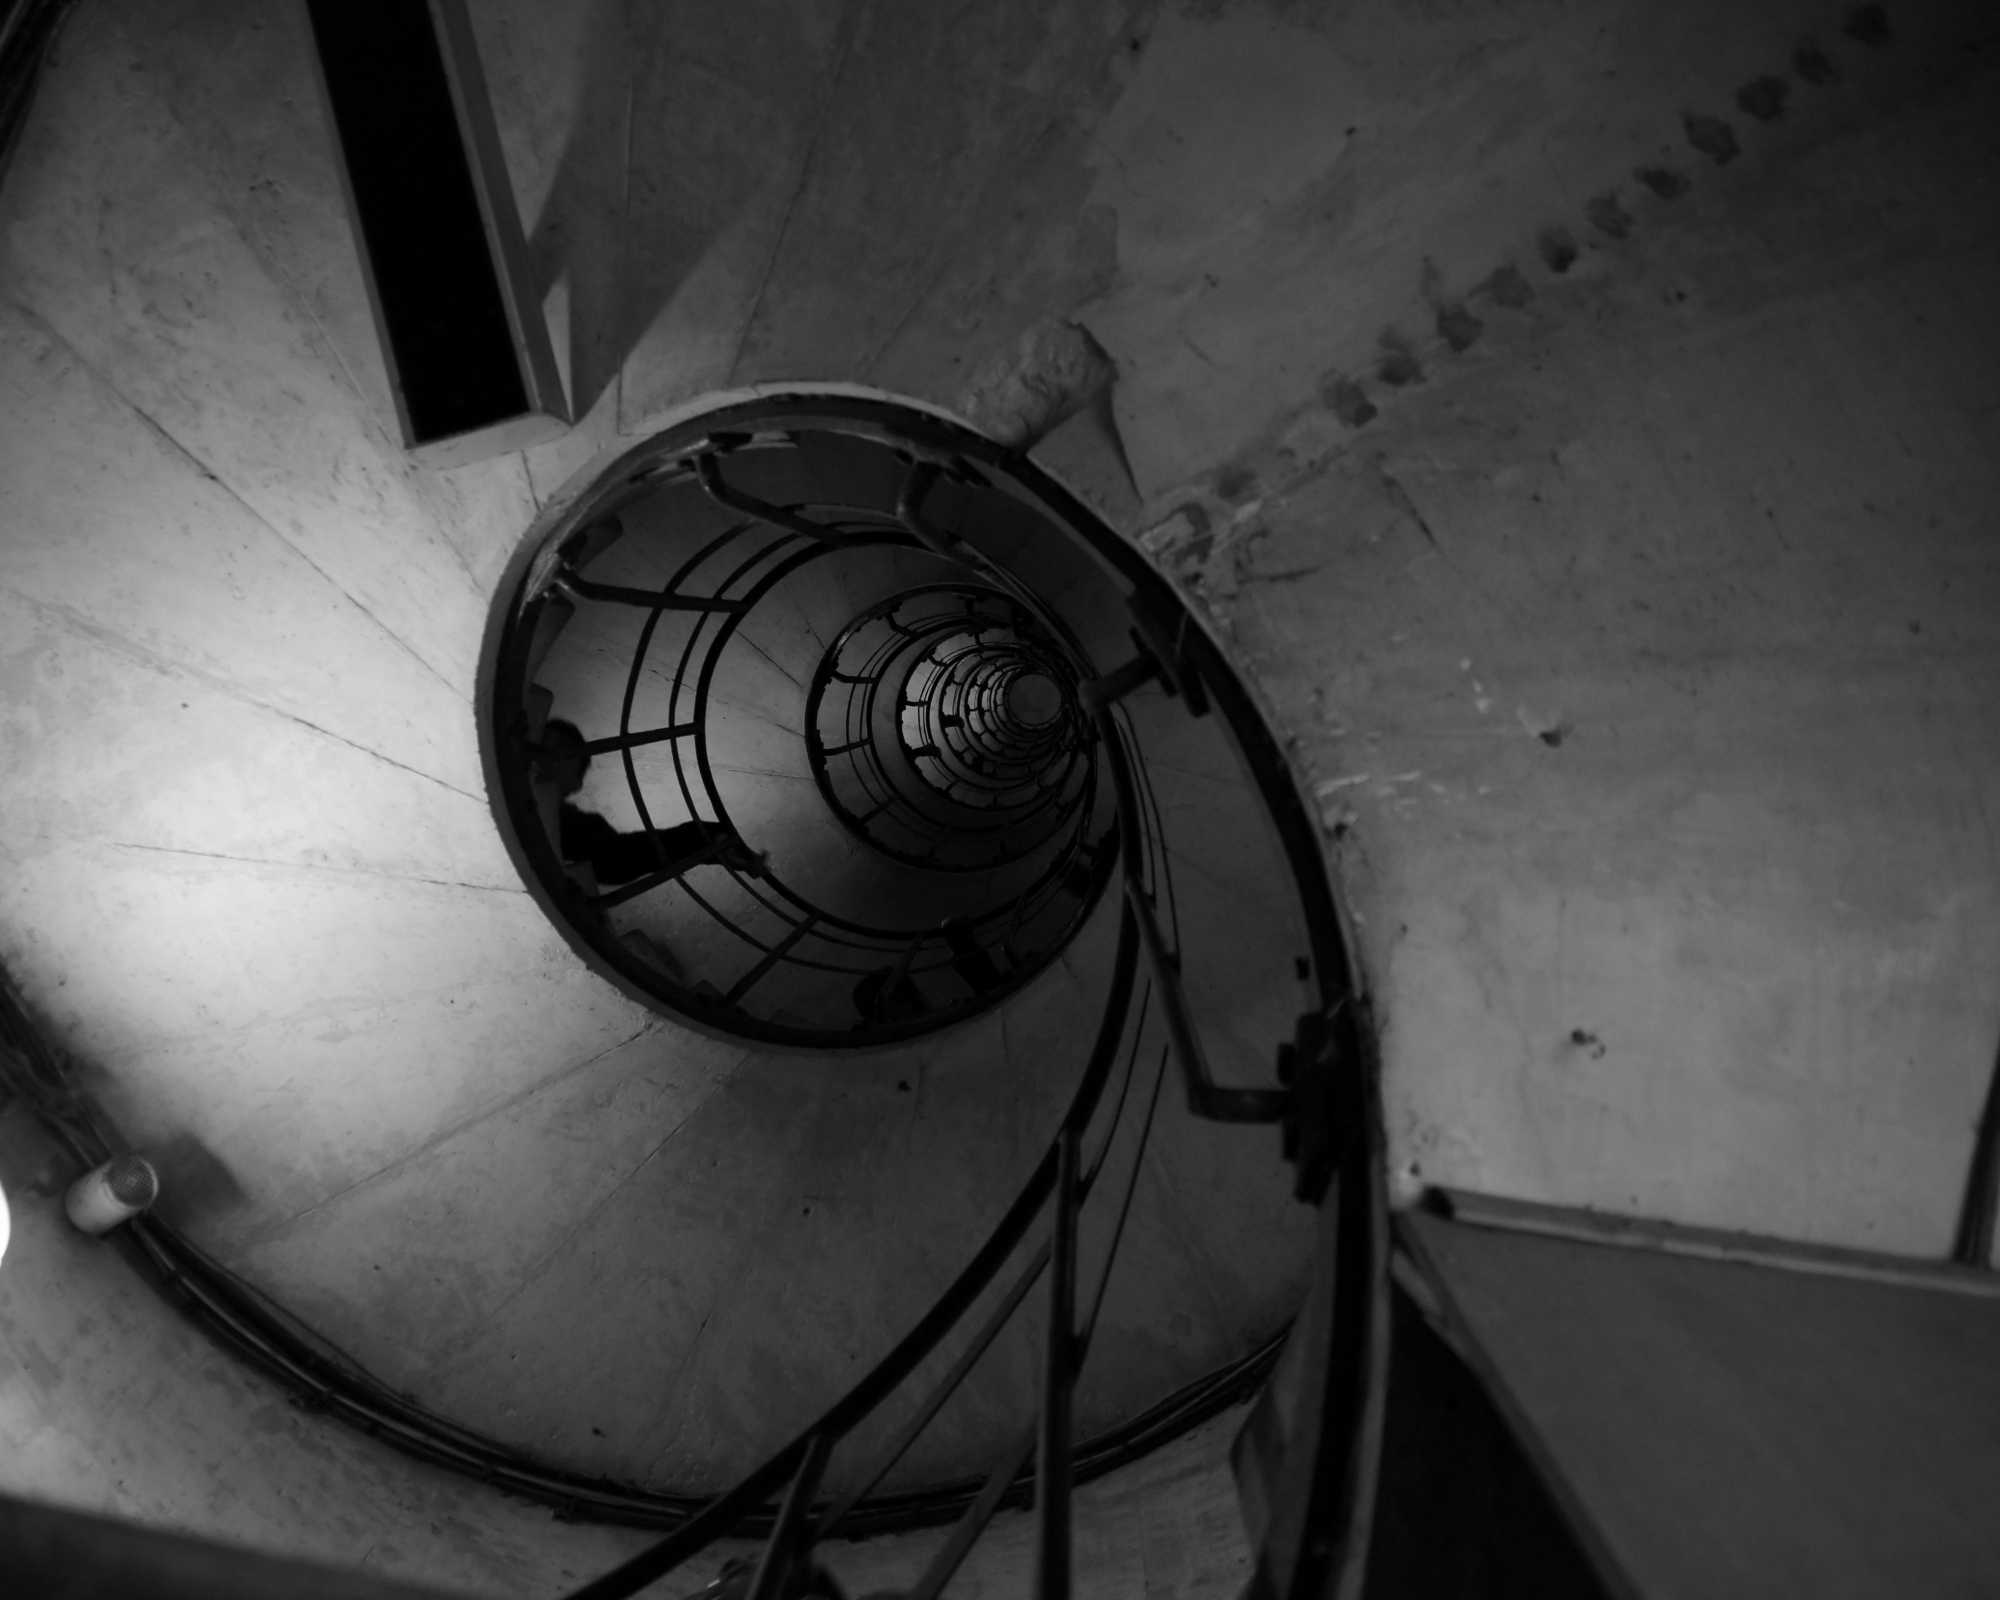 Stairs up the Arc de Triomphe